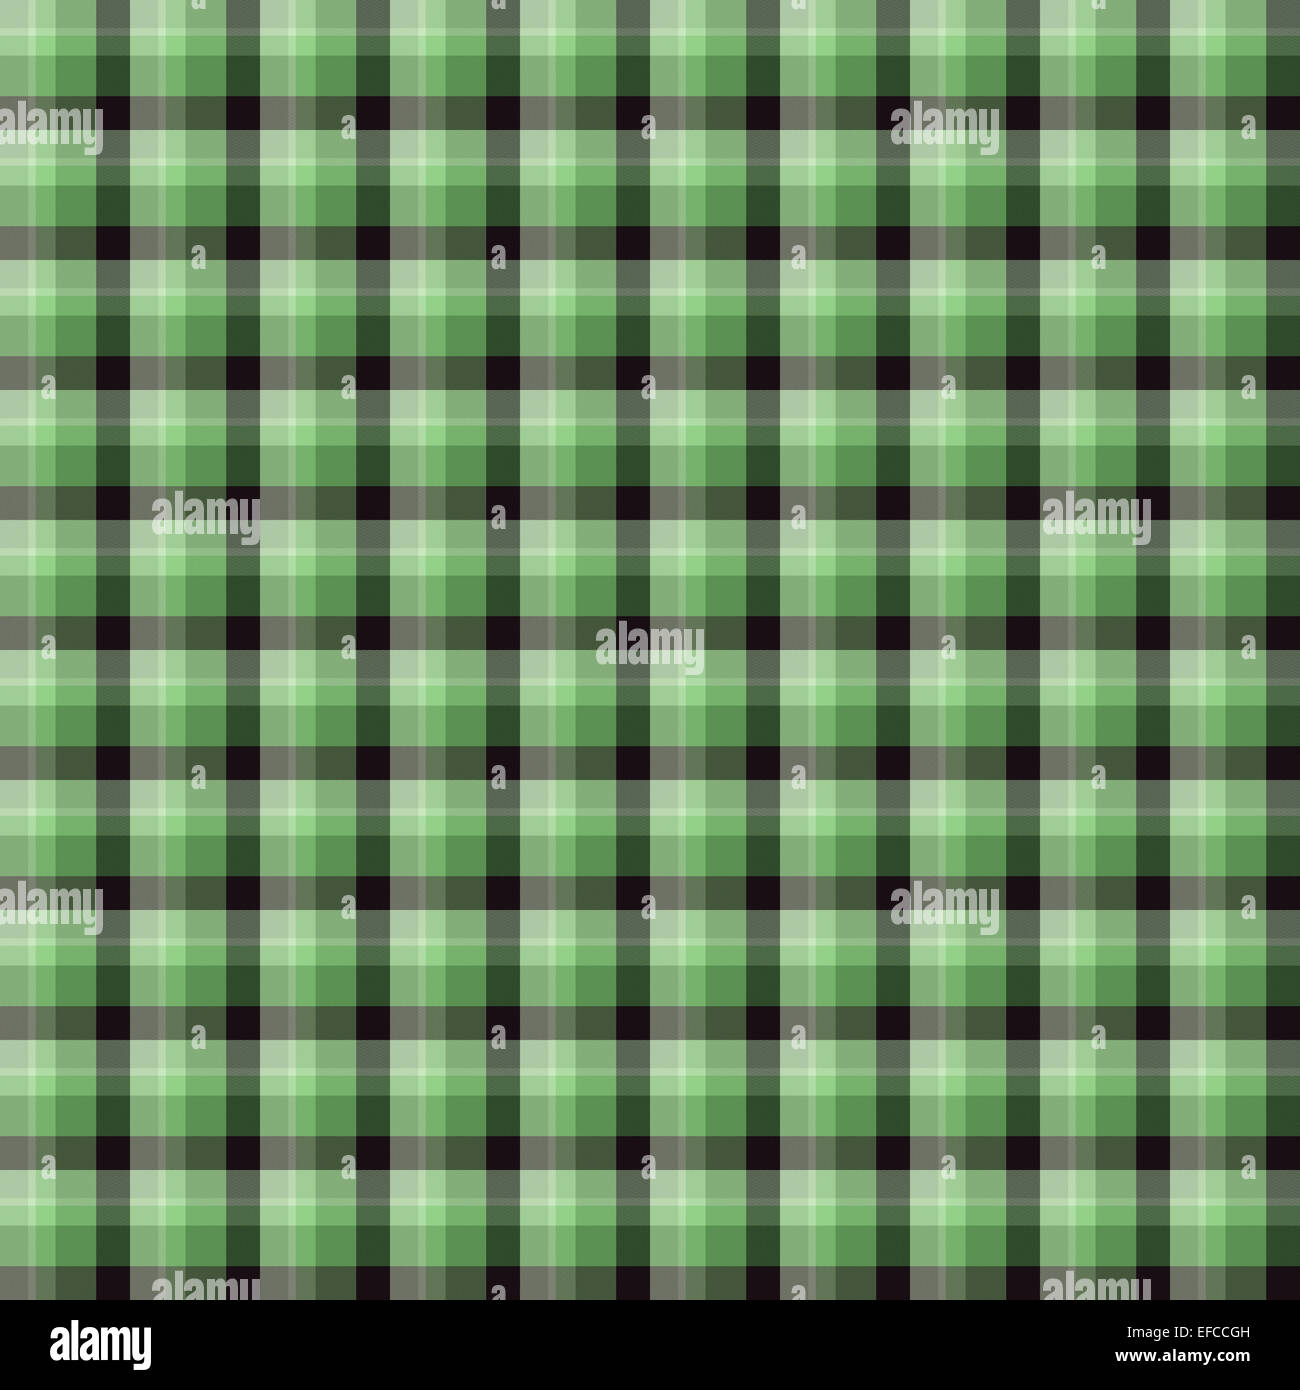 Tartan material for background Stock Photo